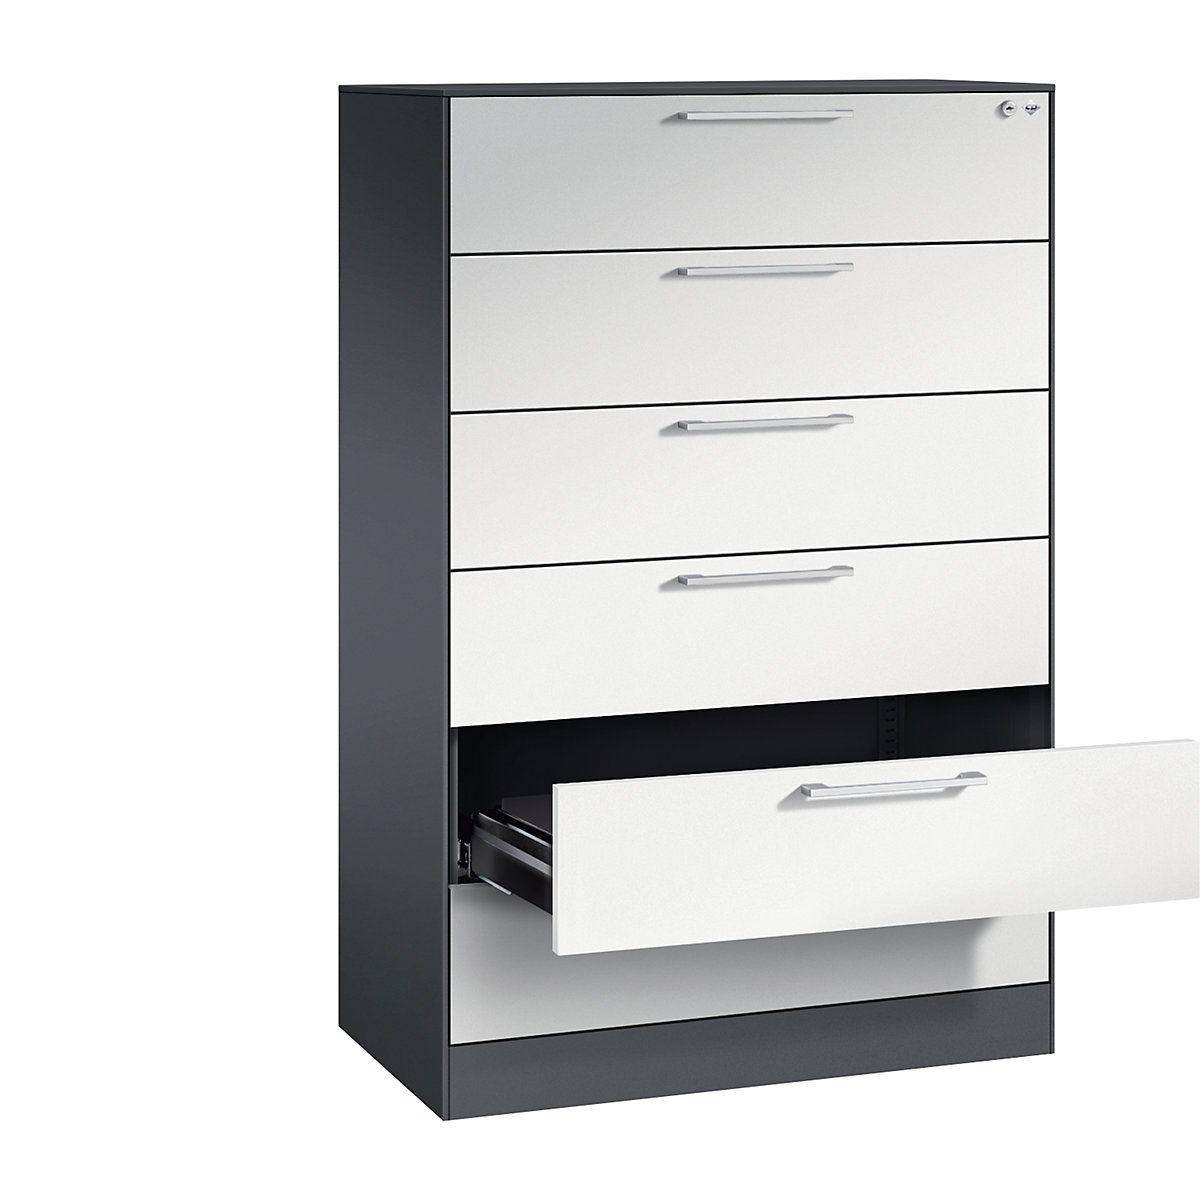 ASISTO card file cabinet – C+P, height 1292 mm, with 6 drawers, A5 landscape, black grey/light grey-6